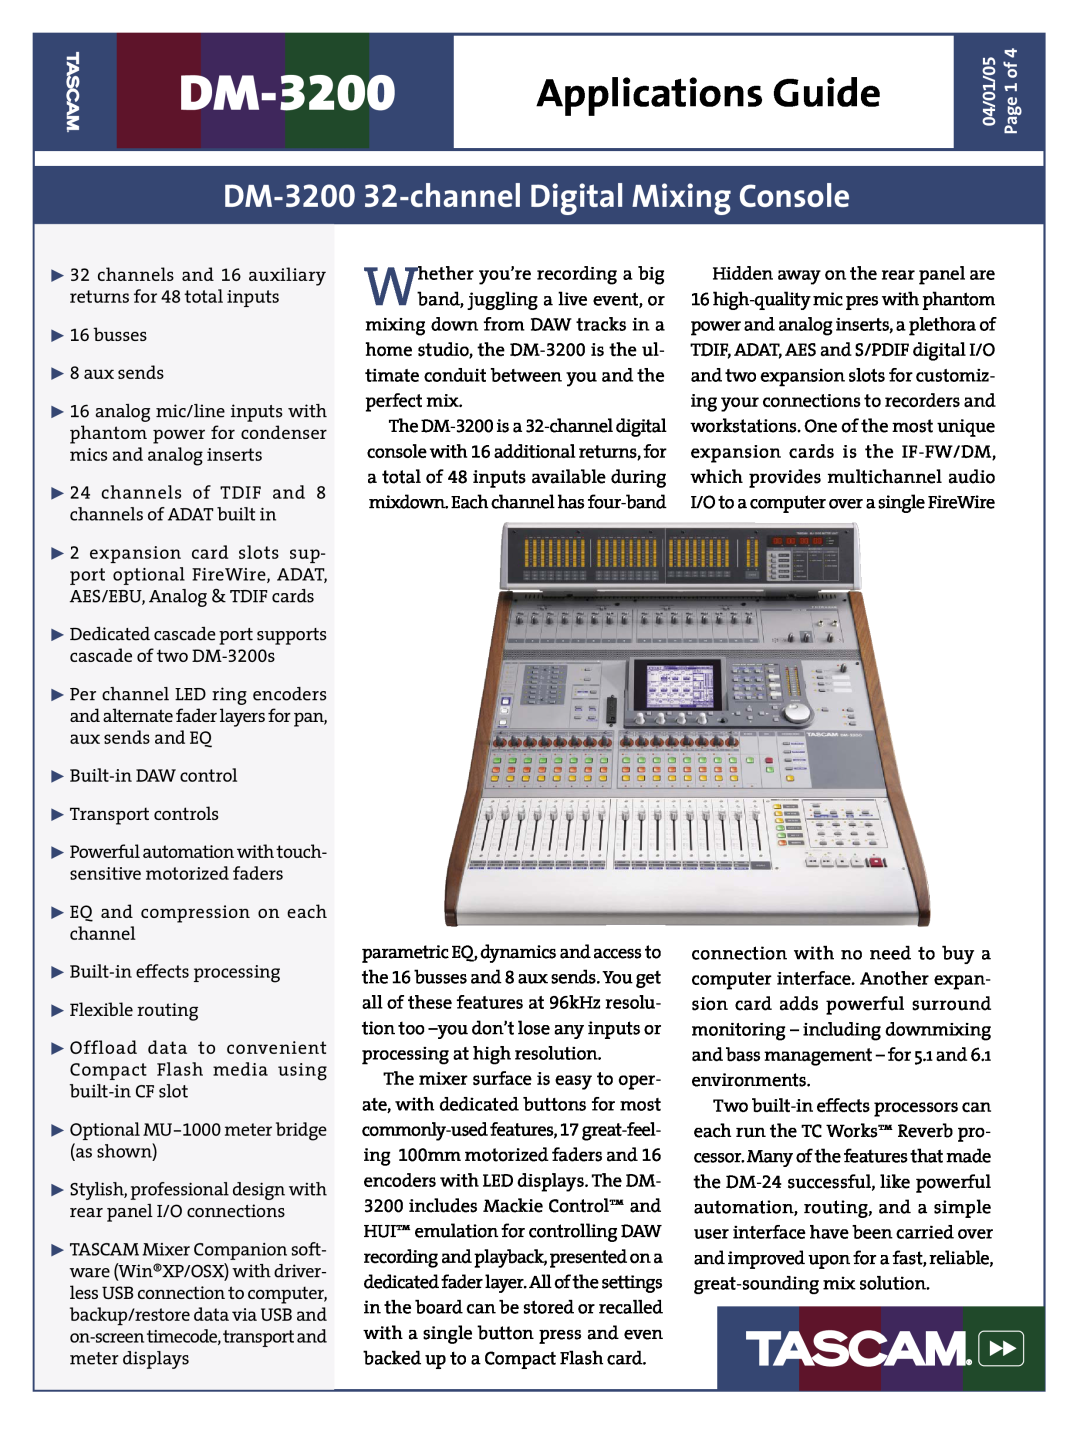 Tascam manual Applications Guide, DM-3200 32-channel Digital Mixing Console 